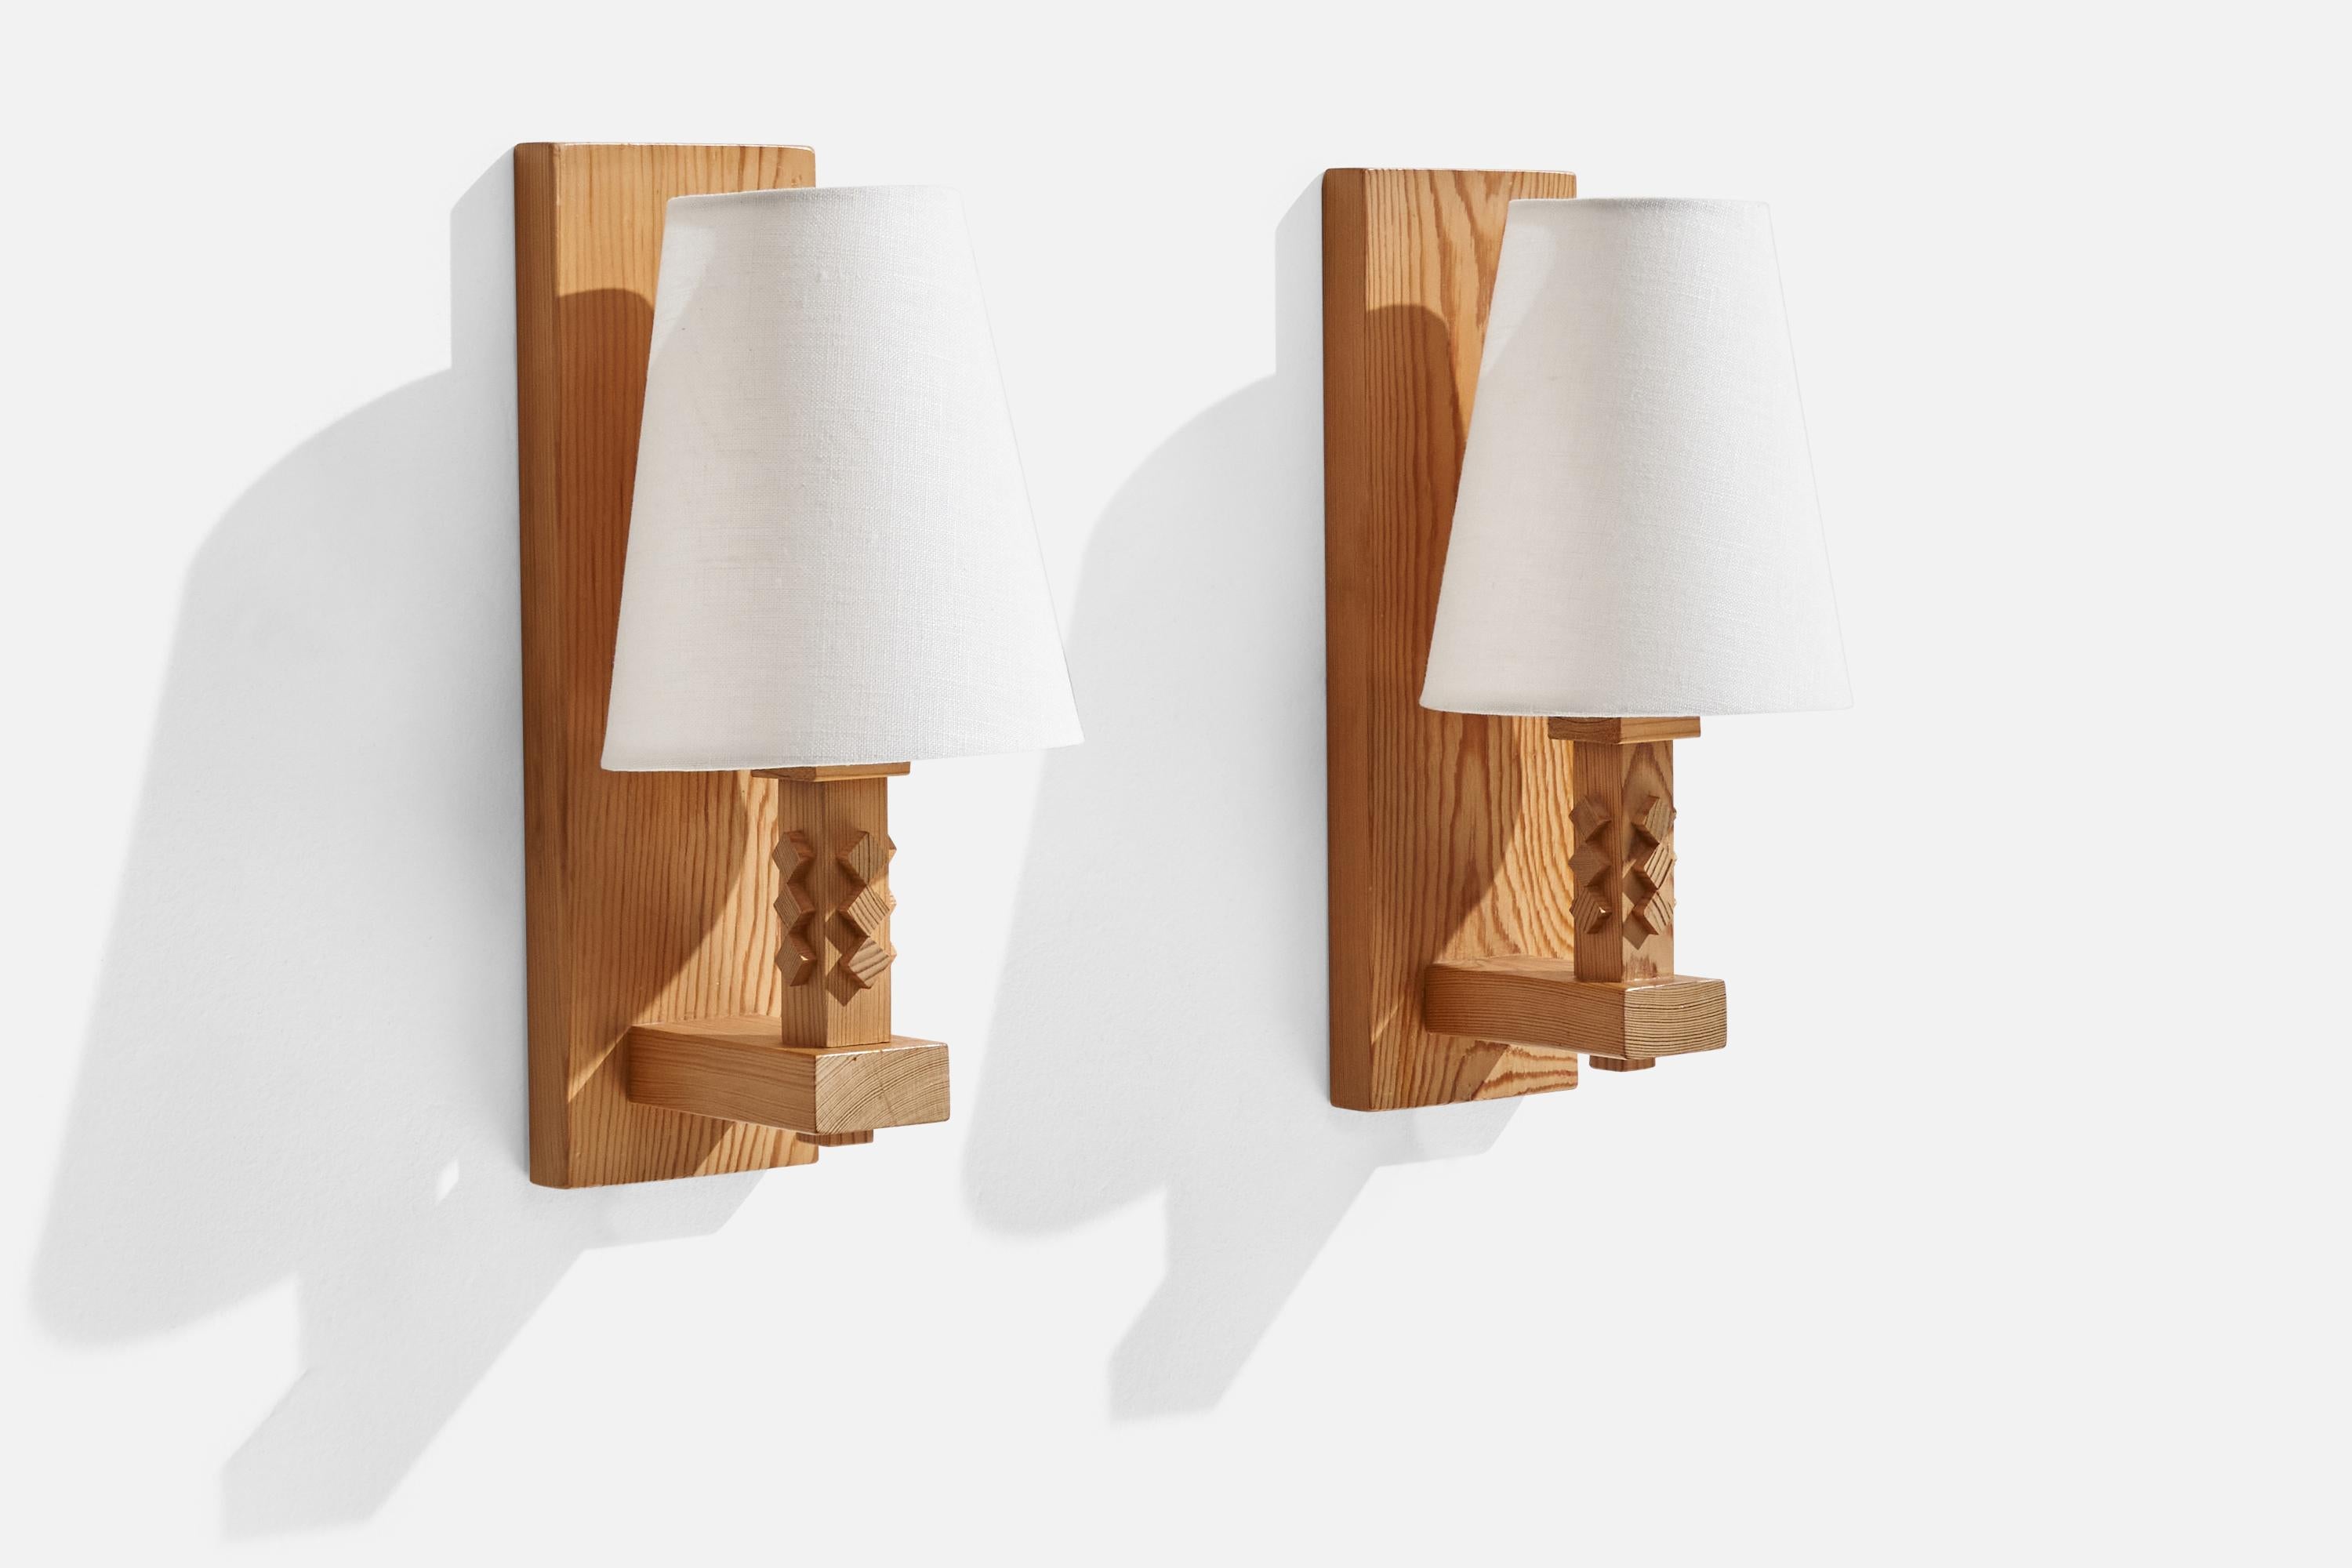 A pair of pine wall lights designed and produced by Leif Wikner, Persåsen, Kövra, Sweden, c. 1970s.

Overall Dimensions (inches): 11.25” H x 5” W x 5.38” D

Back Plate Dimensions (inches):N/A

Bulb Specifications: E-26 Bulb

Number of Sockets: